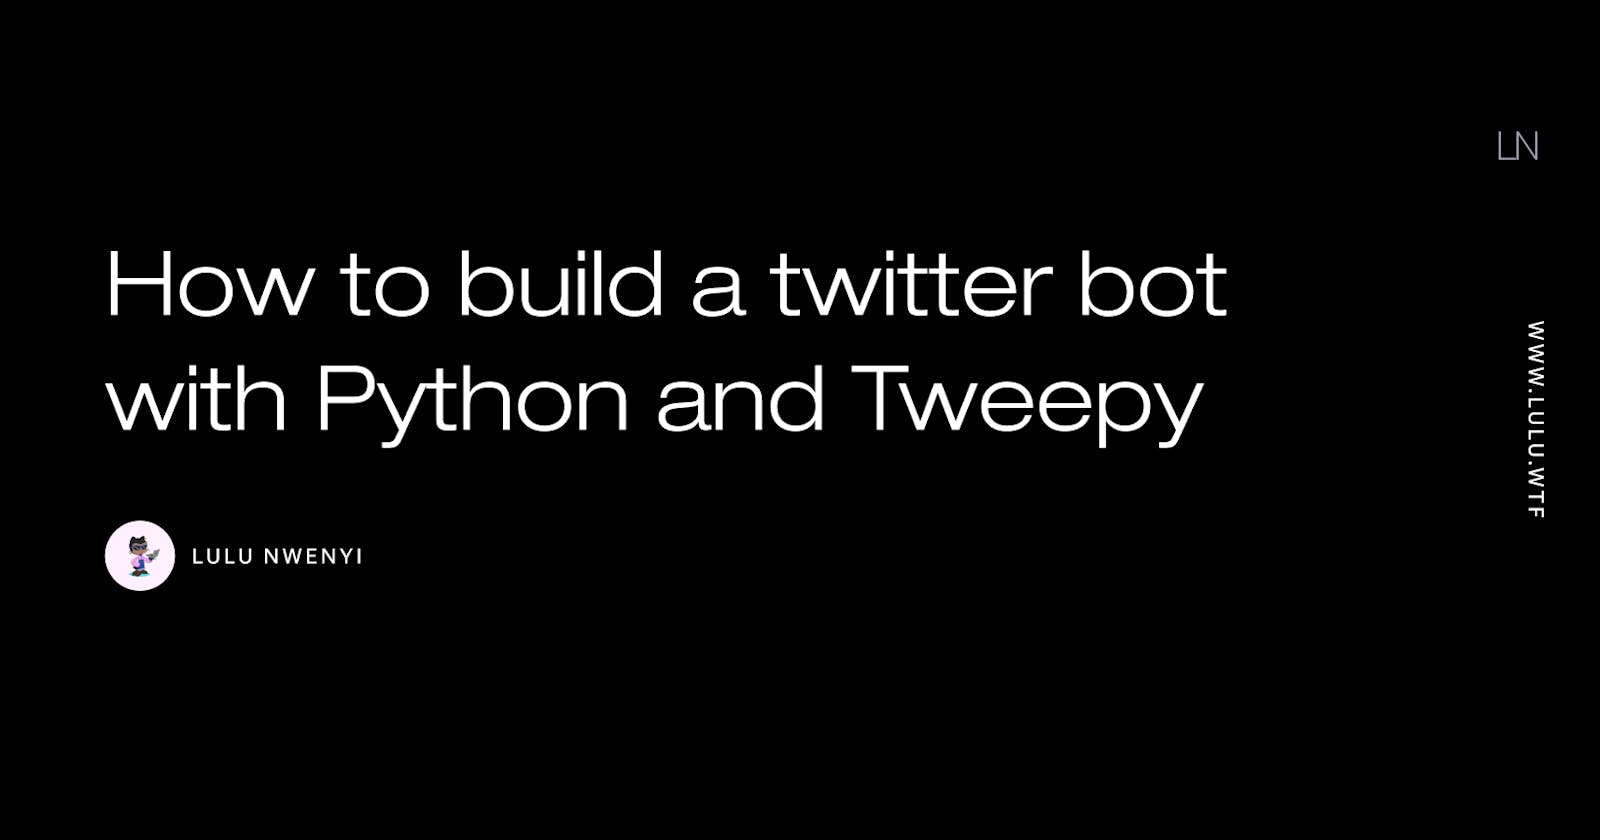 How to build a twitter bot that tweets every 10 minutes with Python and Tweepy